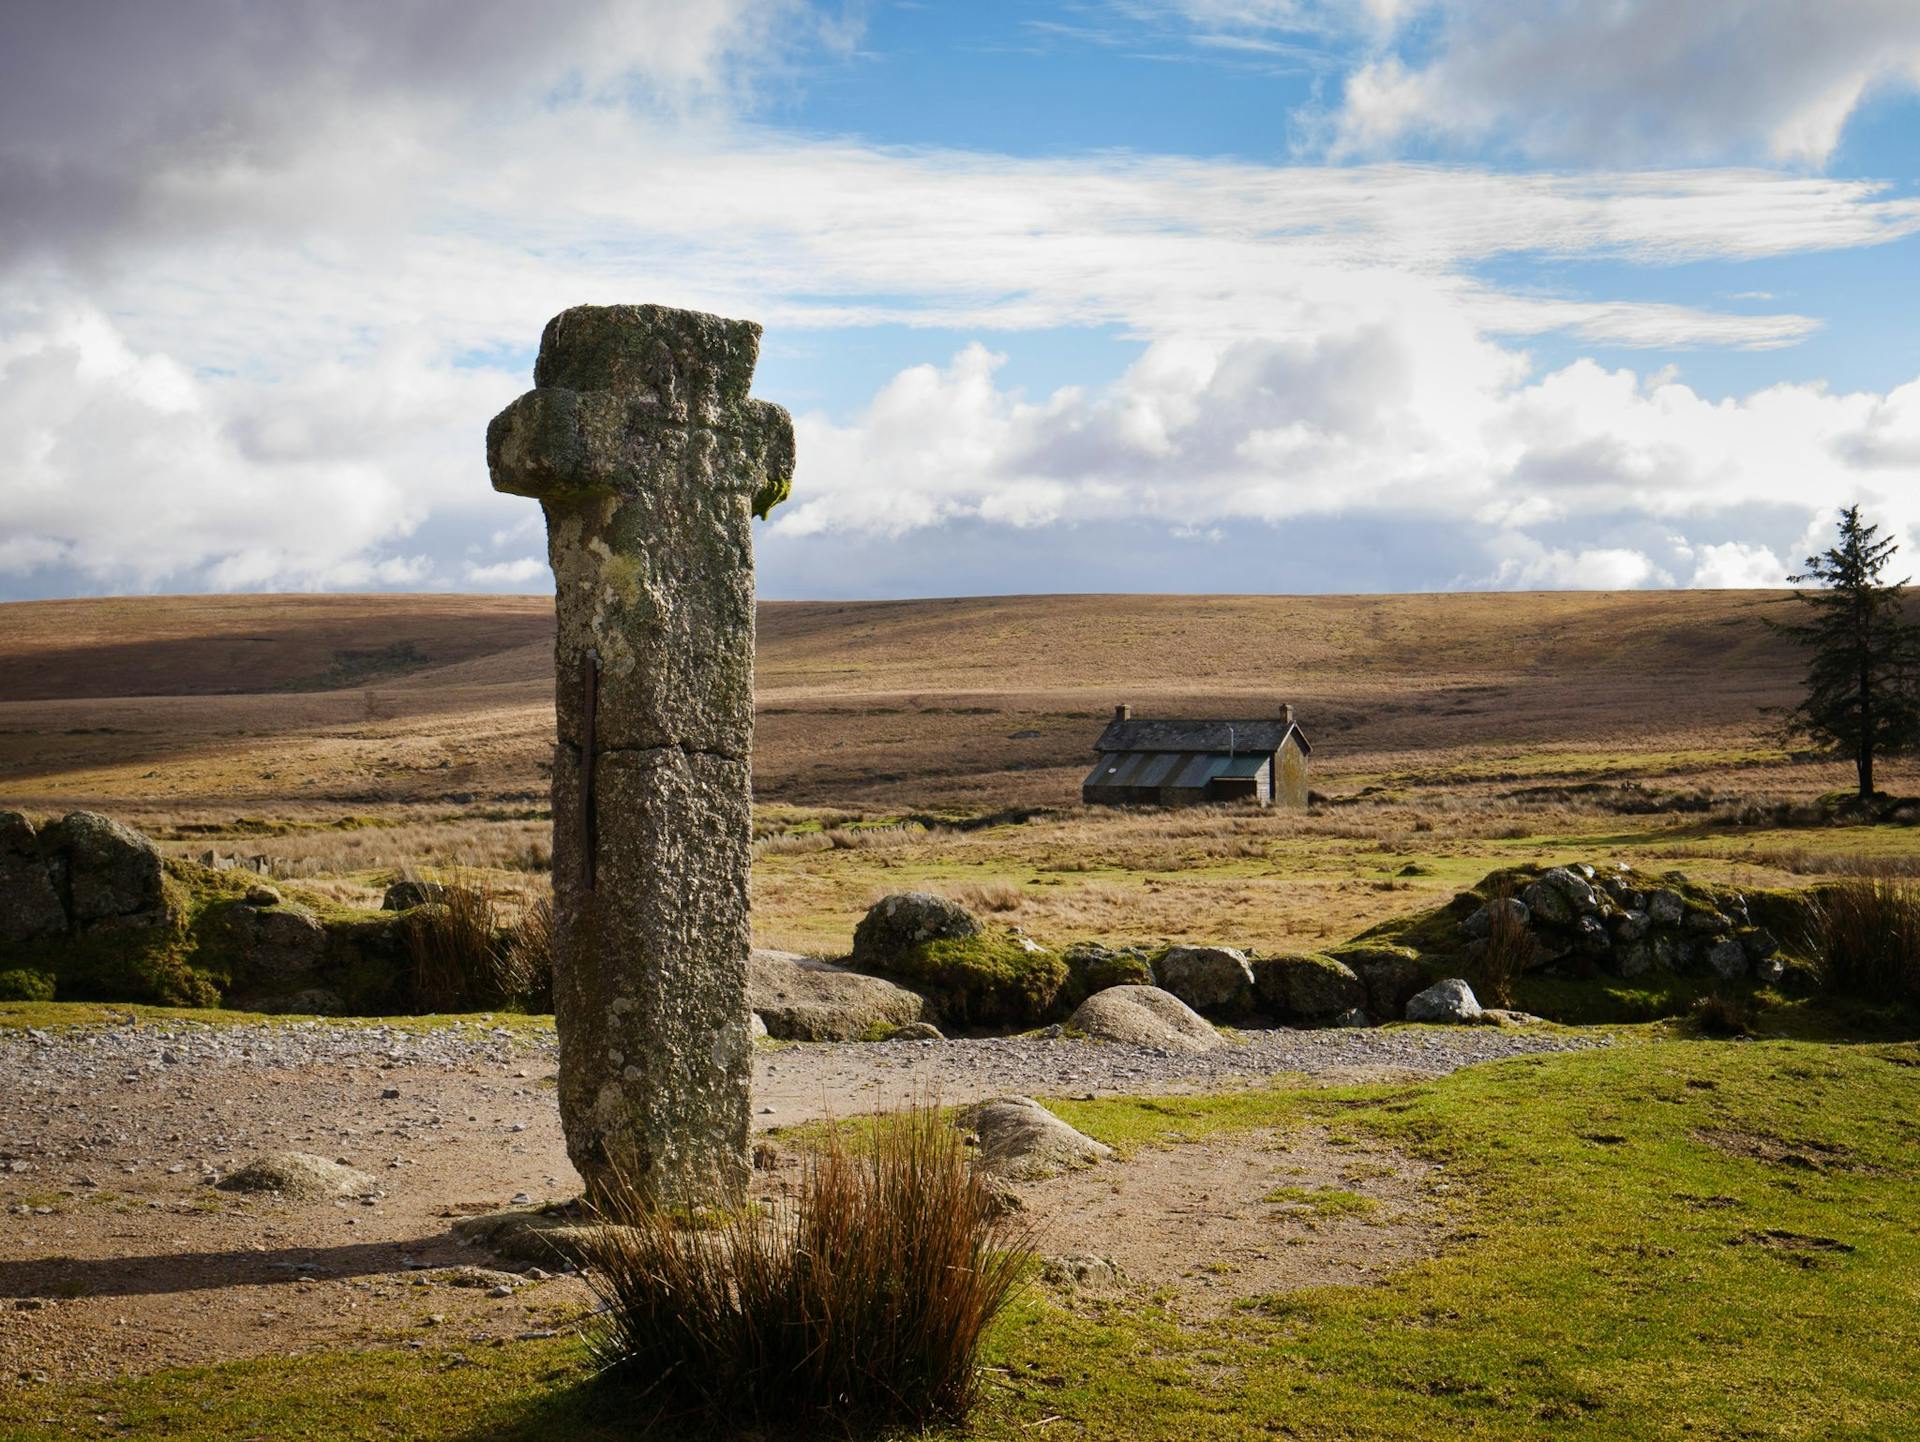 <p>Nun’s Cross Farm is a historic landmark on Dartmoor, located near the ancient Nun’s or Siward’s Cross, which is the oldest recorded stone cross on the moor. The farm was built in 1870 by John Hooper, who leased the land from the Duchy of Cornwall, and raised a family there until his death in 1939. </p><p><br></p><p>The farm is now used as a bunkhouse and base for outdoor activities, such as hiking, cycling, and exploring the nearby prehistoric sites3. You can hire the farm for private use, or follow the Abbot’s Way, a monastic route that passes by the farm and connects Buckfast Abbey and Tavistock Abbey2 . Nun’s Cross Farm is a great place to experience the beauty and history of Dartmoor. 🌿</p>